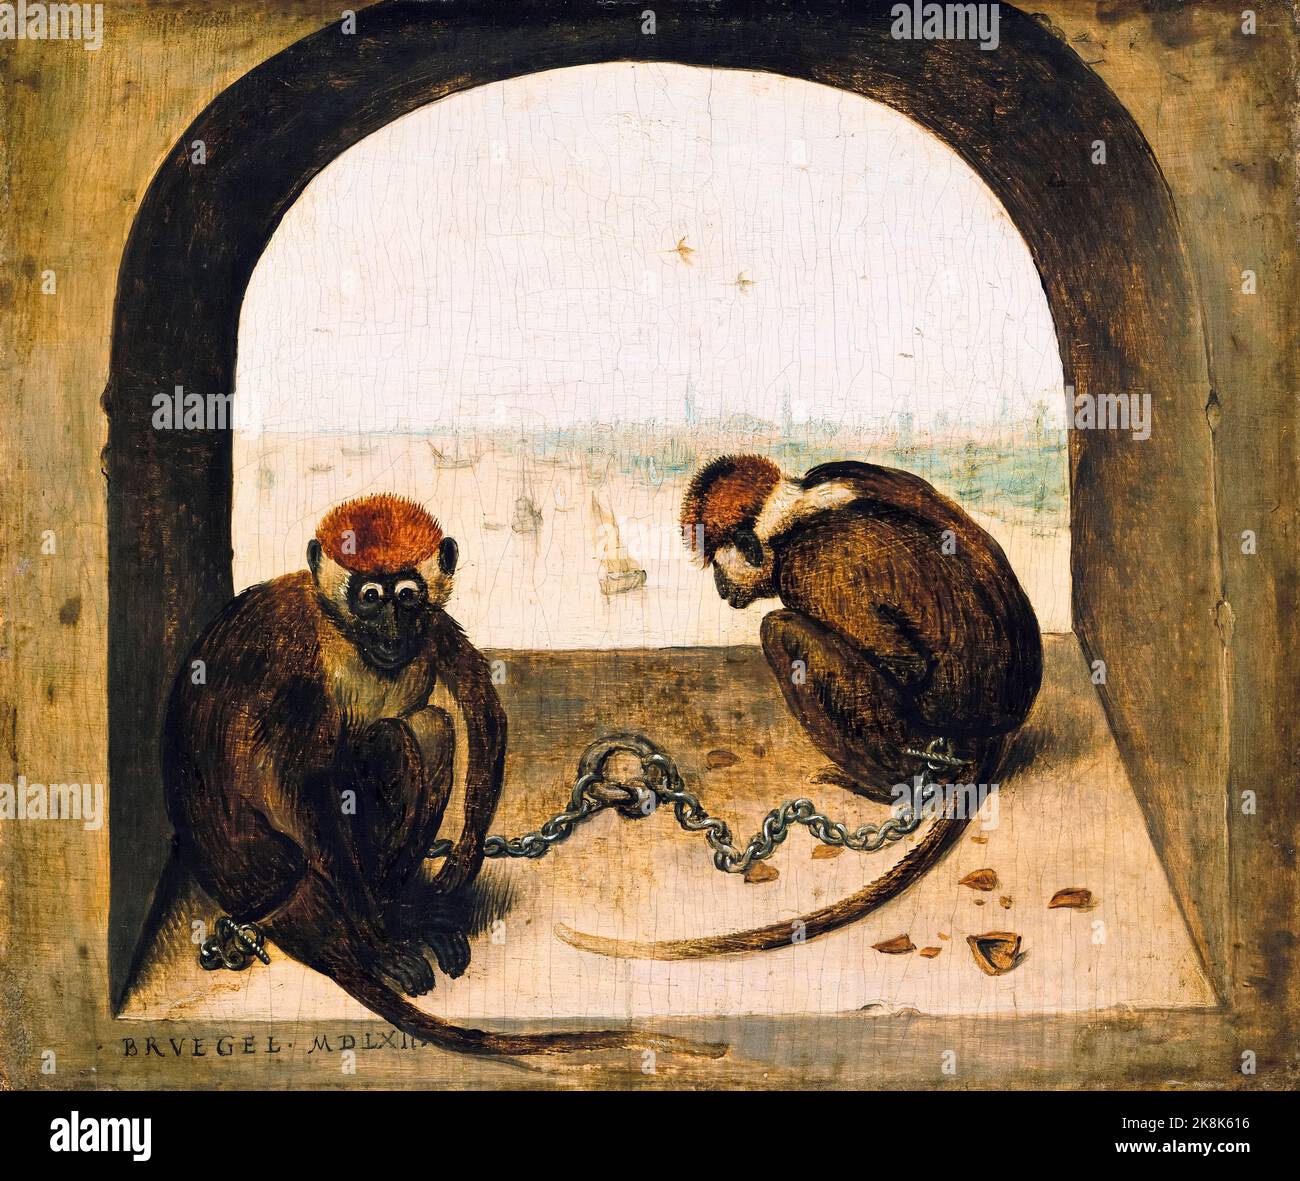 Pieter Brueghel the Elder, Two Chained Monkeys, painting in oil on panel, 1562 Stock Photo